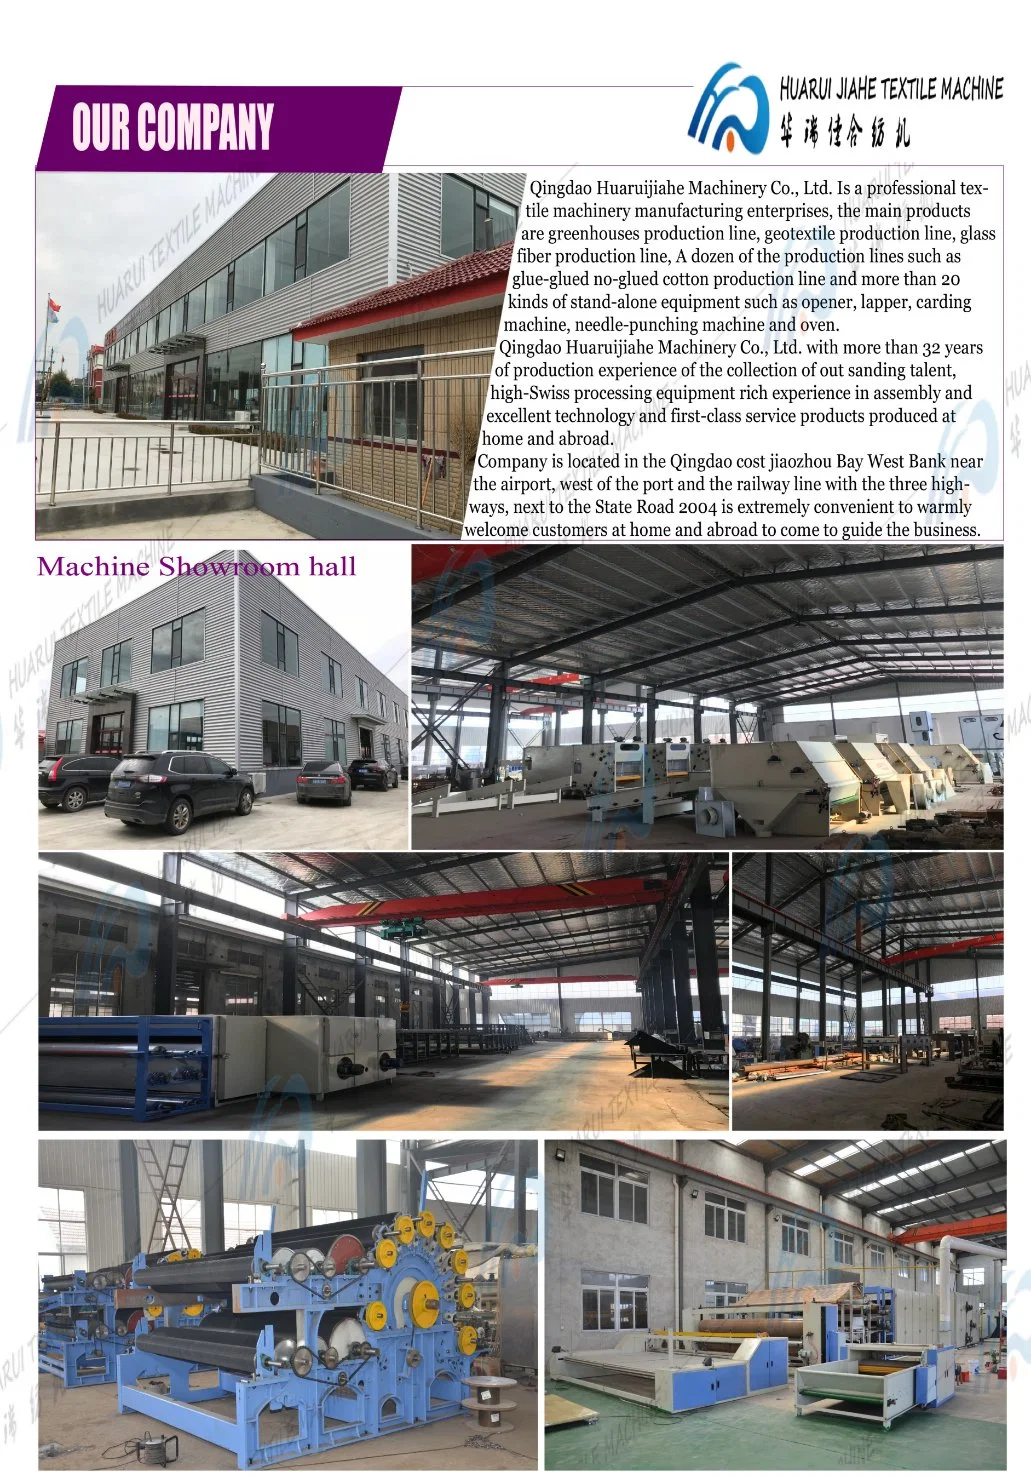 [Recommended Price Negotiable] Fast, High Temperature and High Efficiency Package Yarn Dryer, Setting Machine